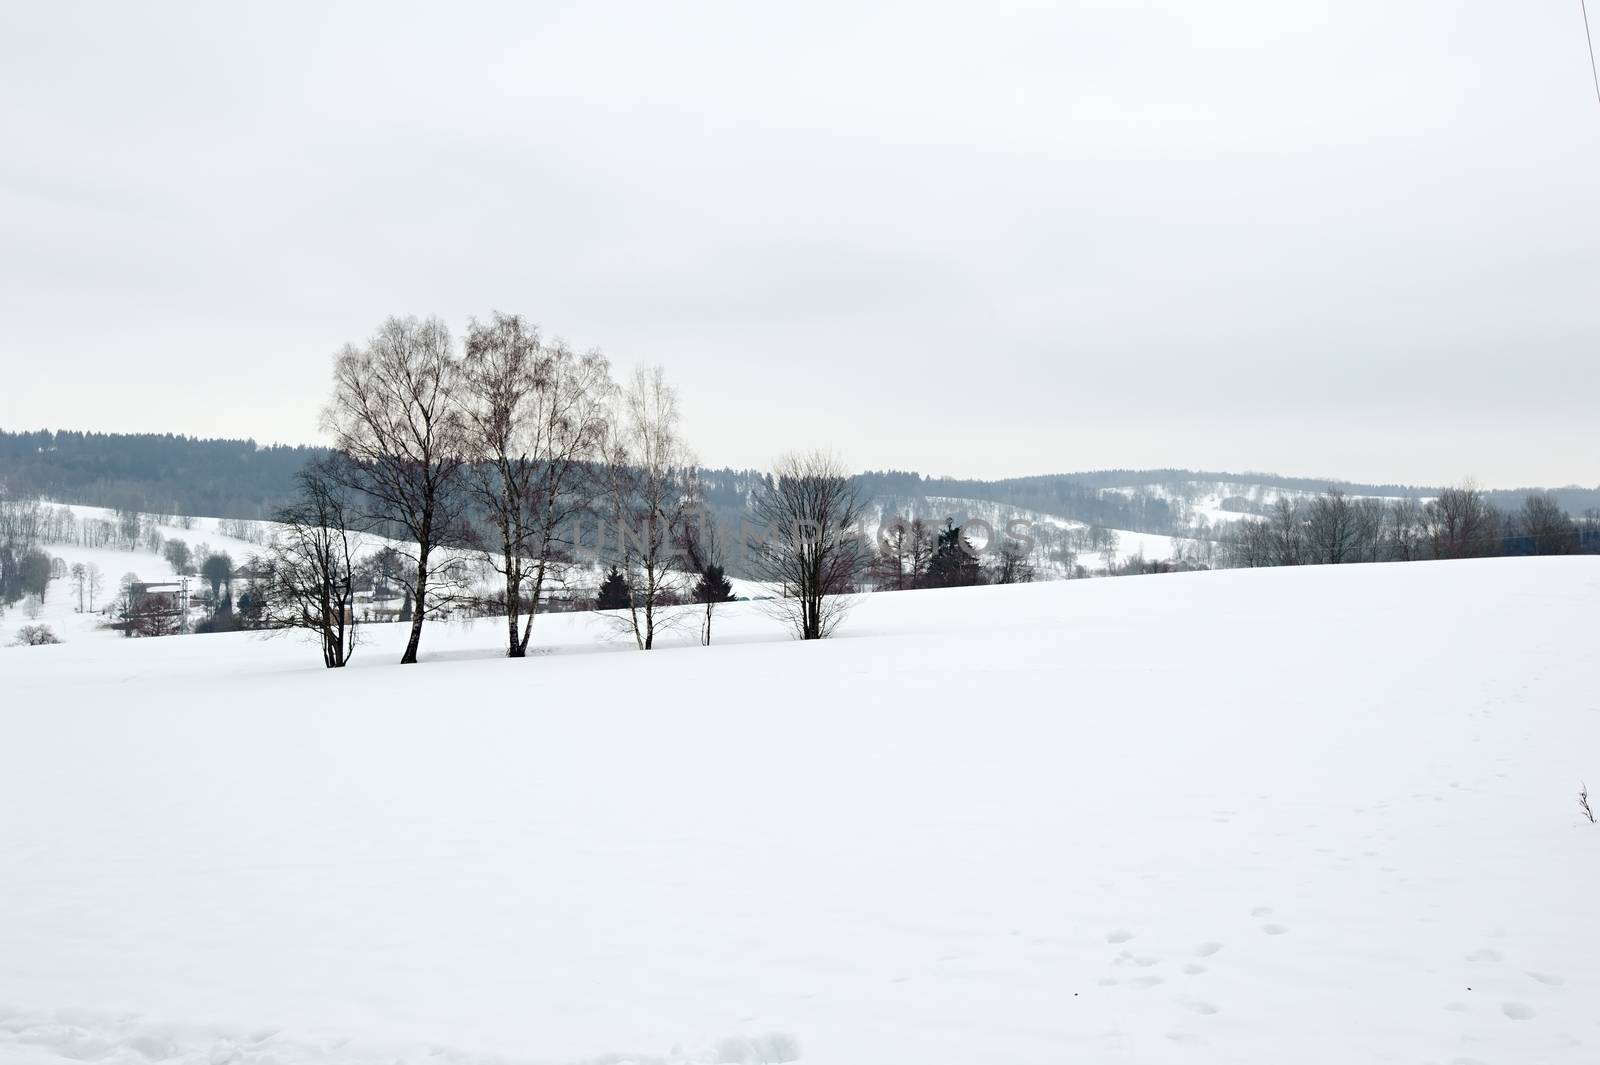 Winter frosty snowy landscape with trees and cloudy sky